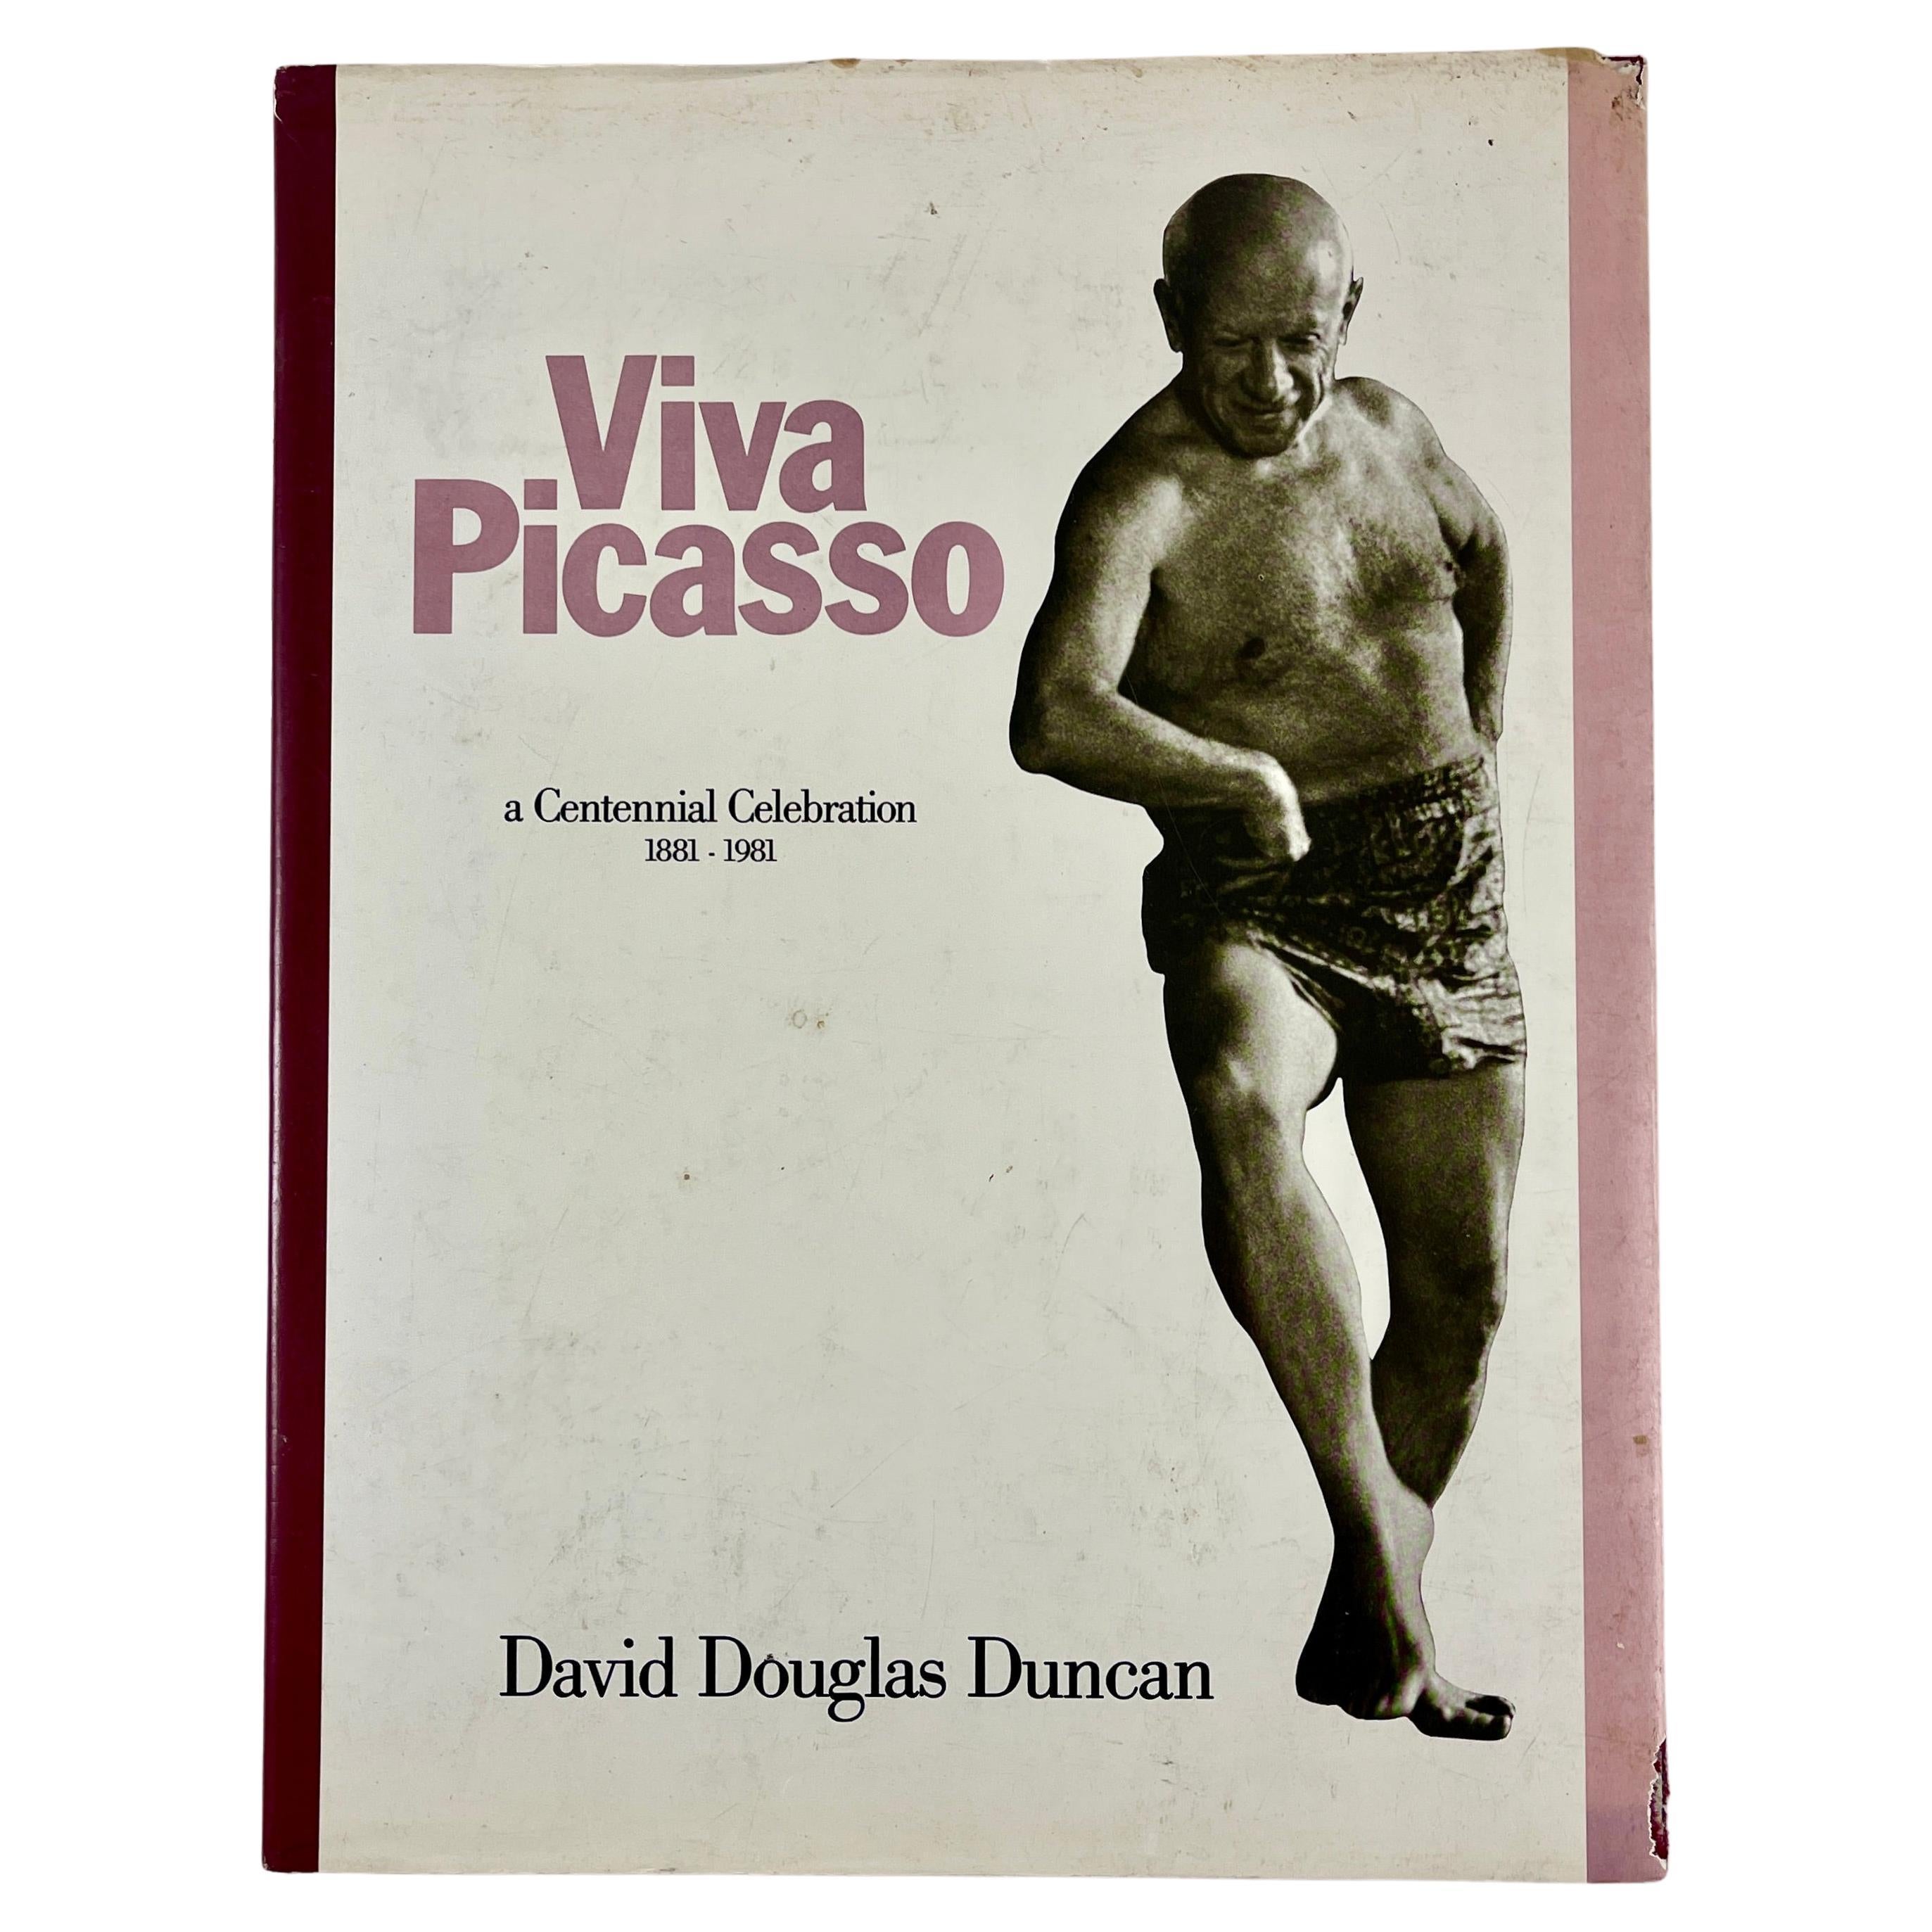 Viva Picasso: a Centennial Celebration 1881-1981 Hardcover Book with Jacket For Sale